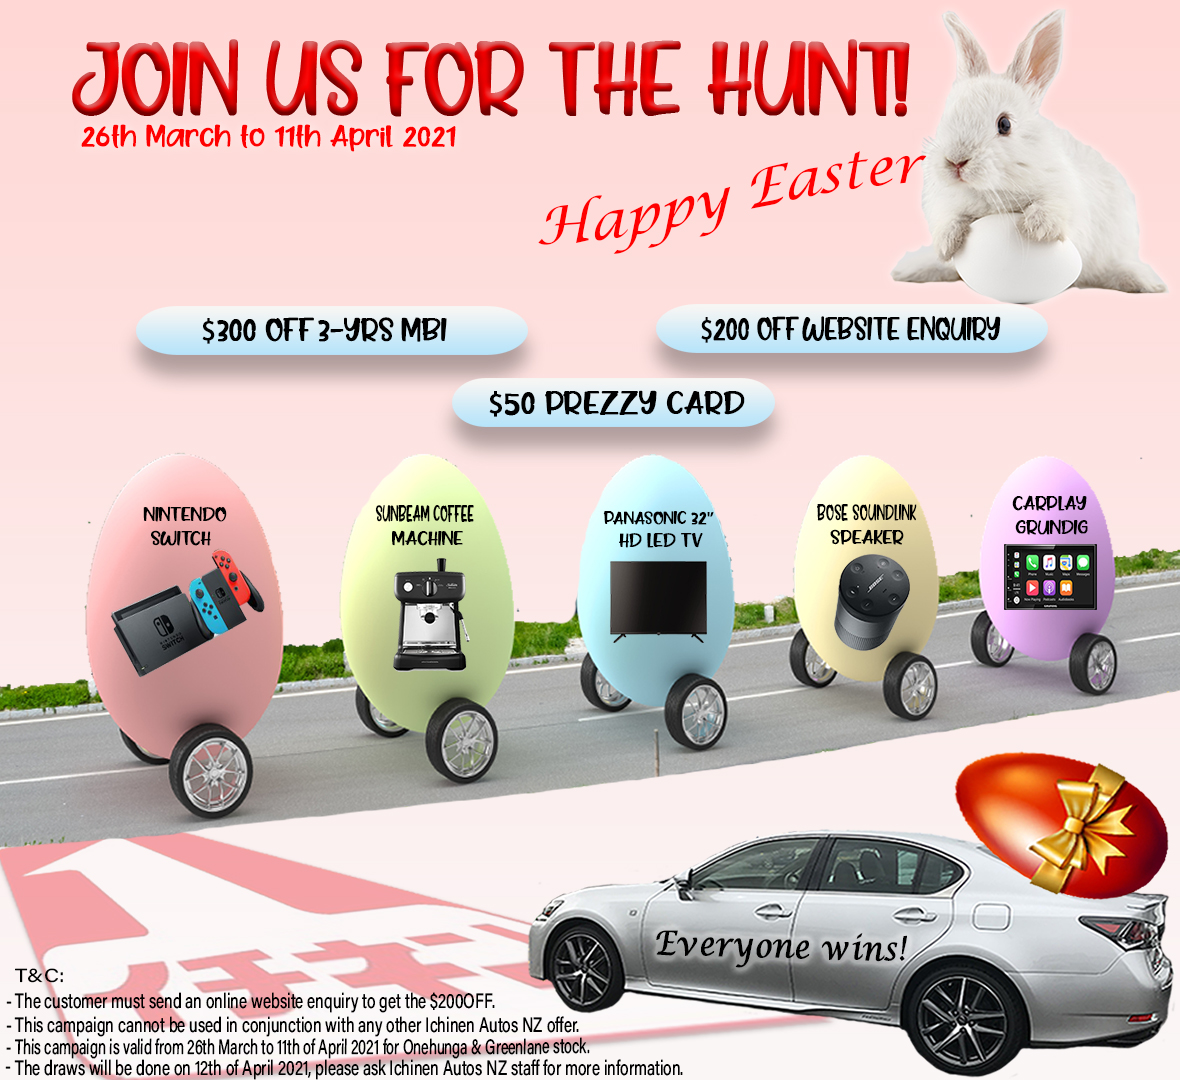 Join us for the egg car hunt & win cool prizes!!!